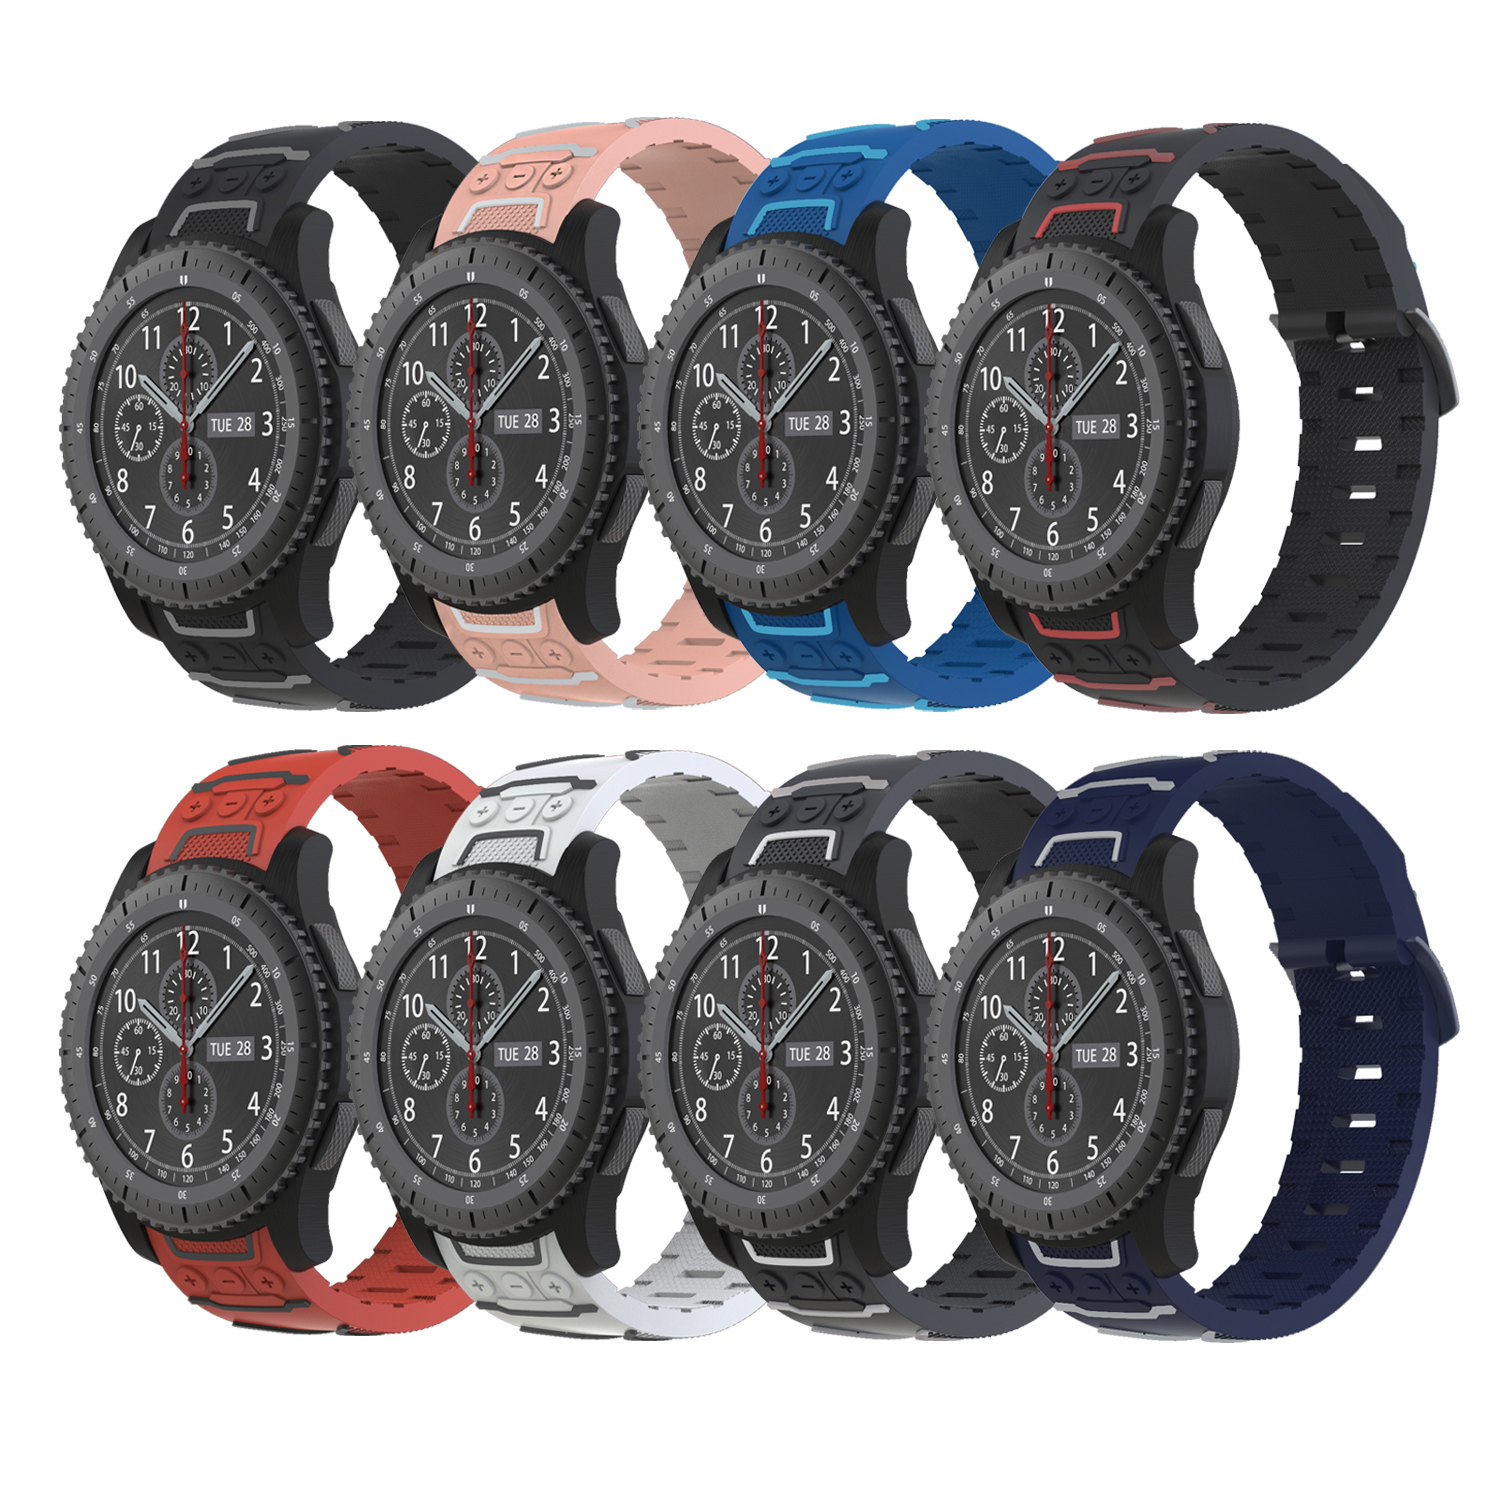 Bakeey-22mm-Silicone-Watch-Band-Soft-Watch-Strap-for-Samsung-Gear-S3-FrontierClassic-1537569-1